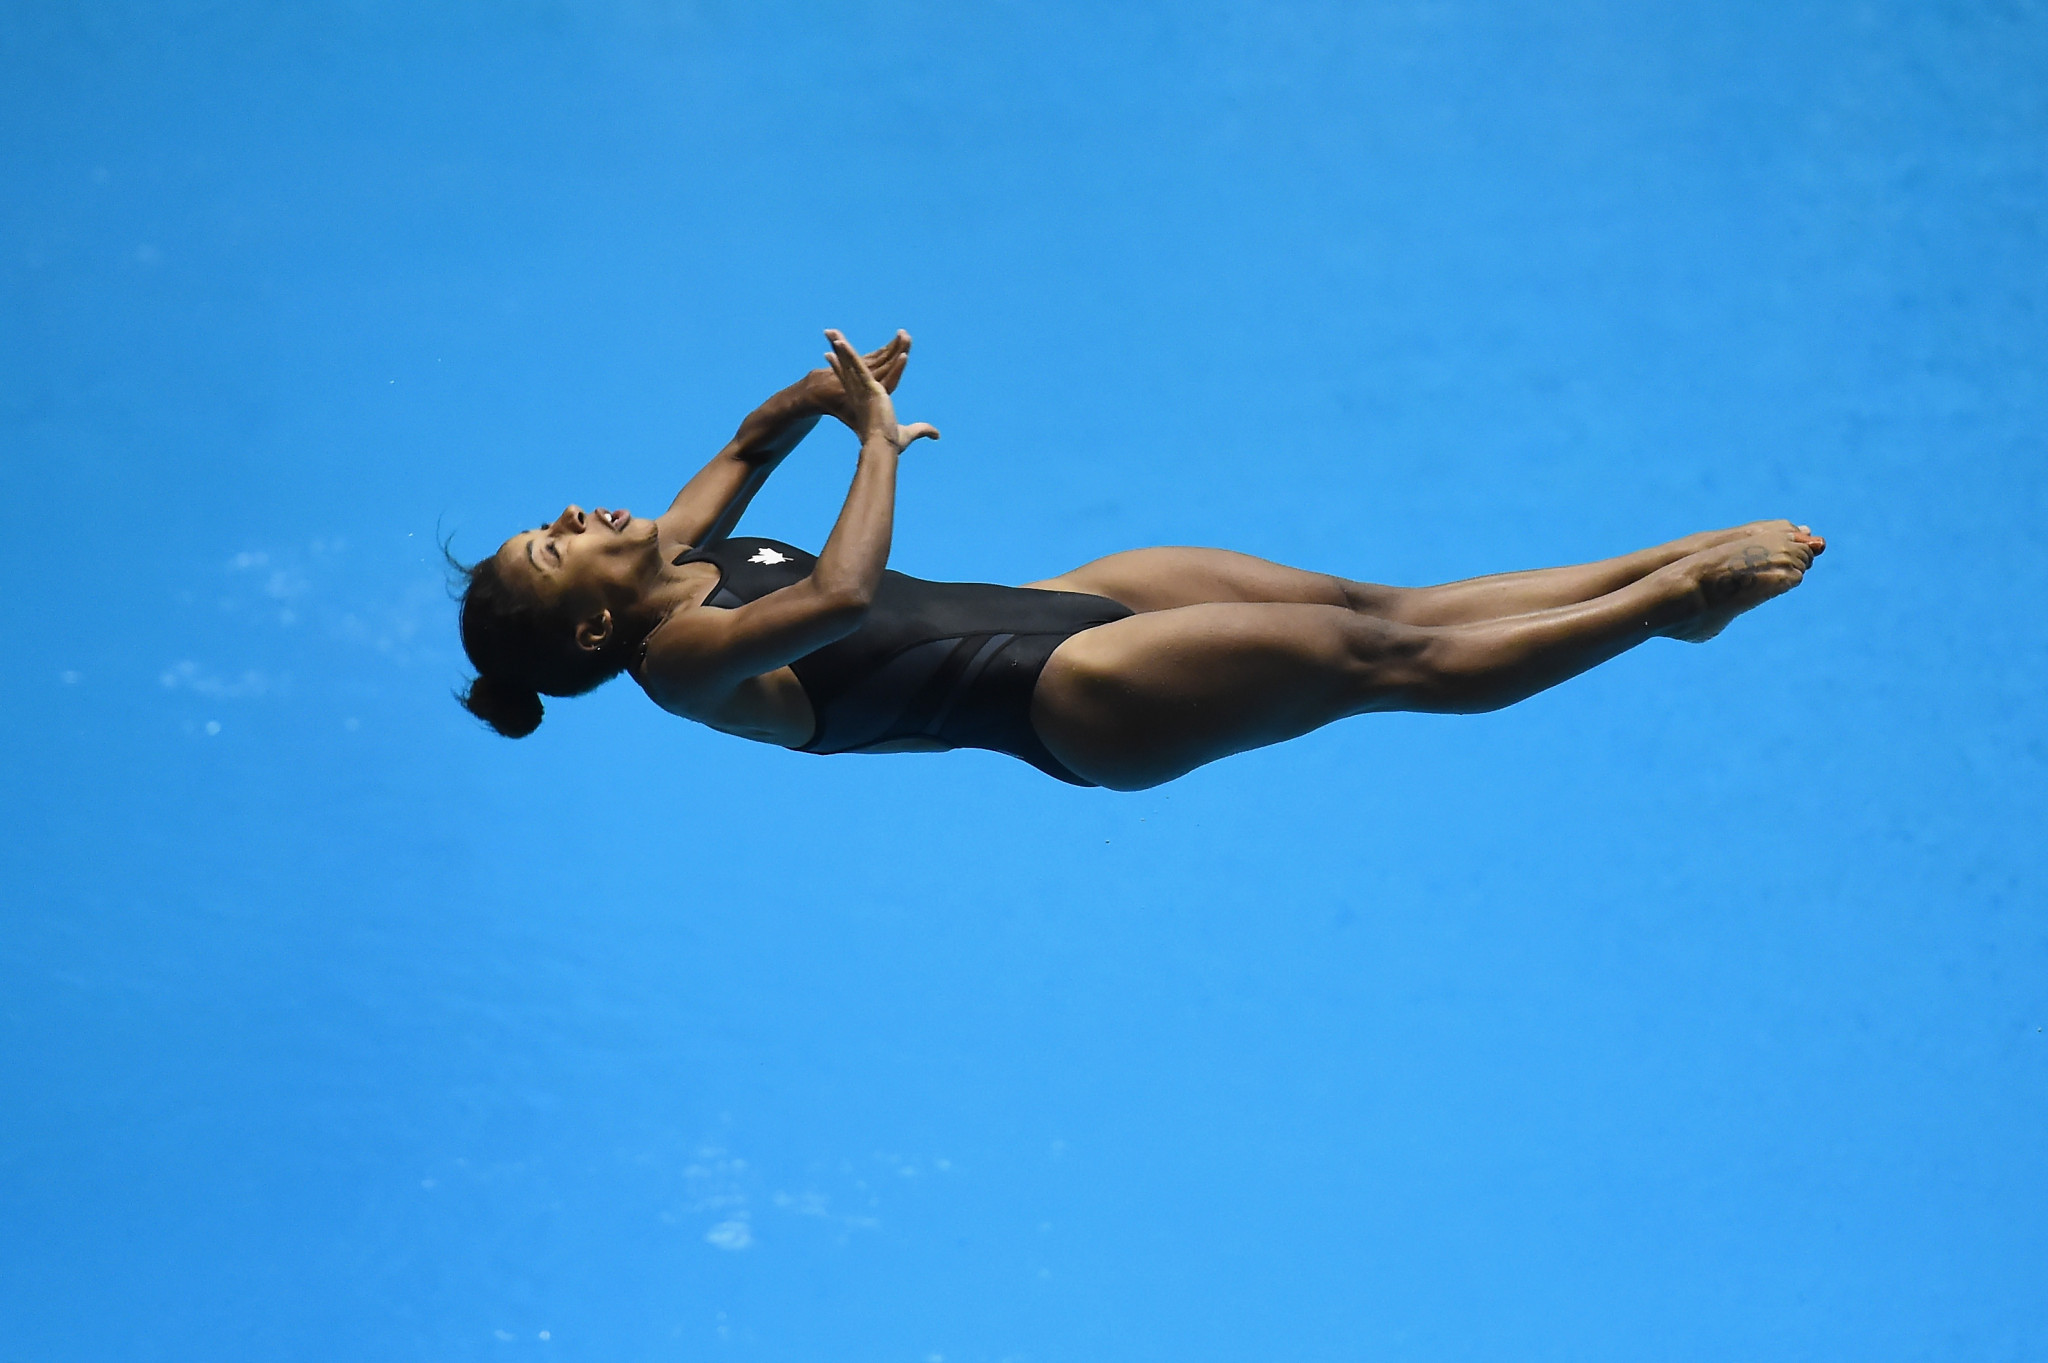 Jennifer Abel earned springboard gold in front of a home crowd ©Getty Images